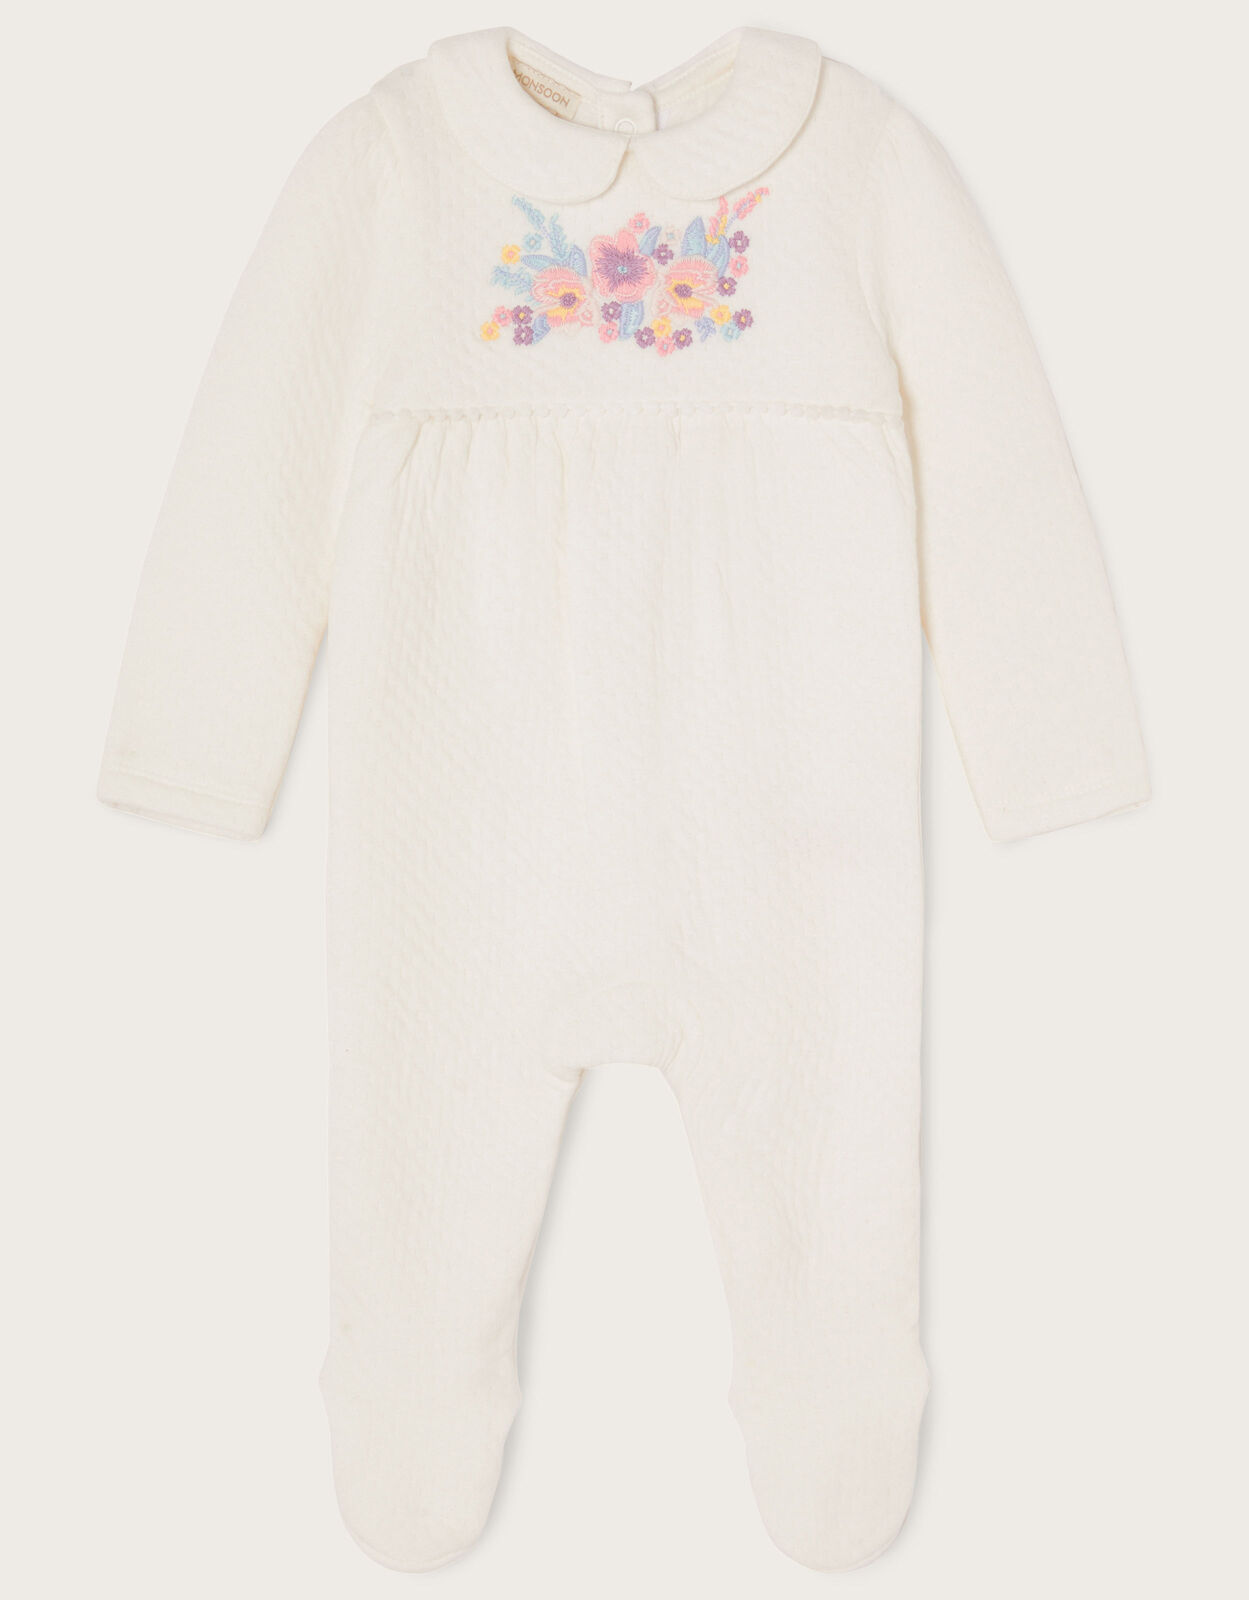 Mamas & Papas Baby Girls Floral Frill Sleeve Romper 